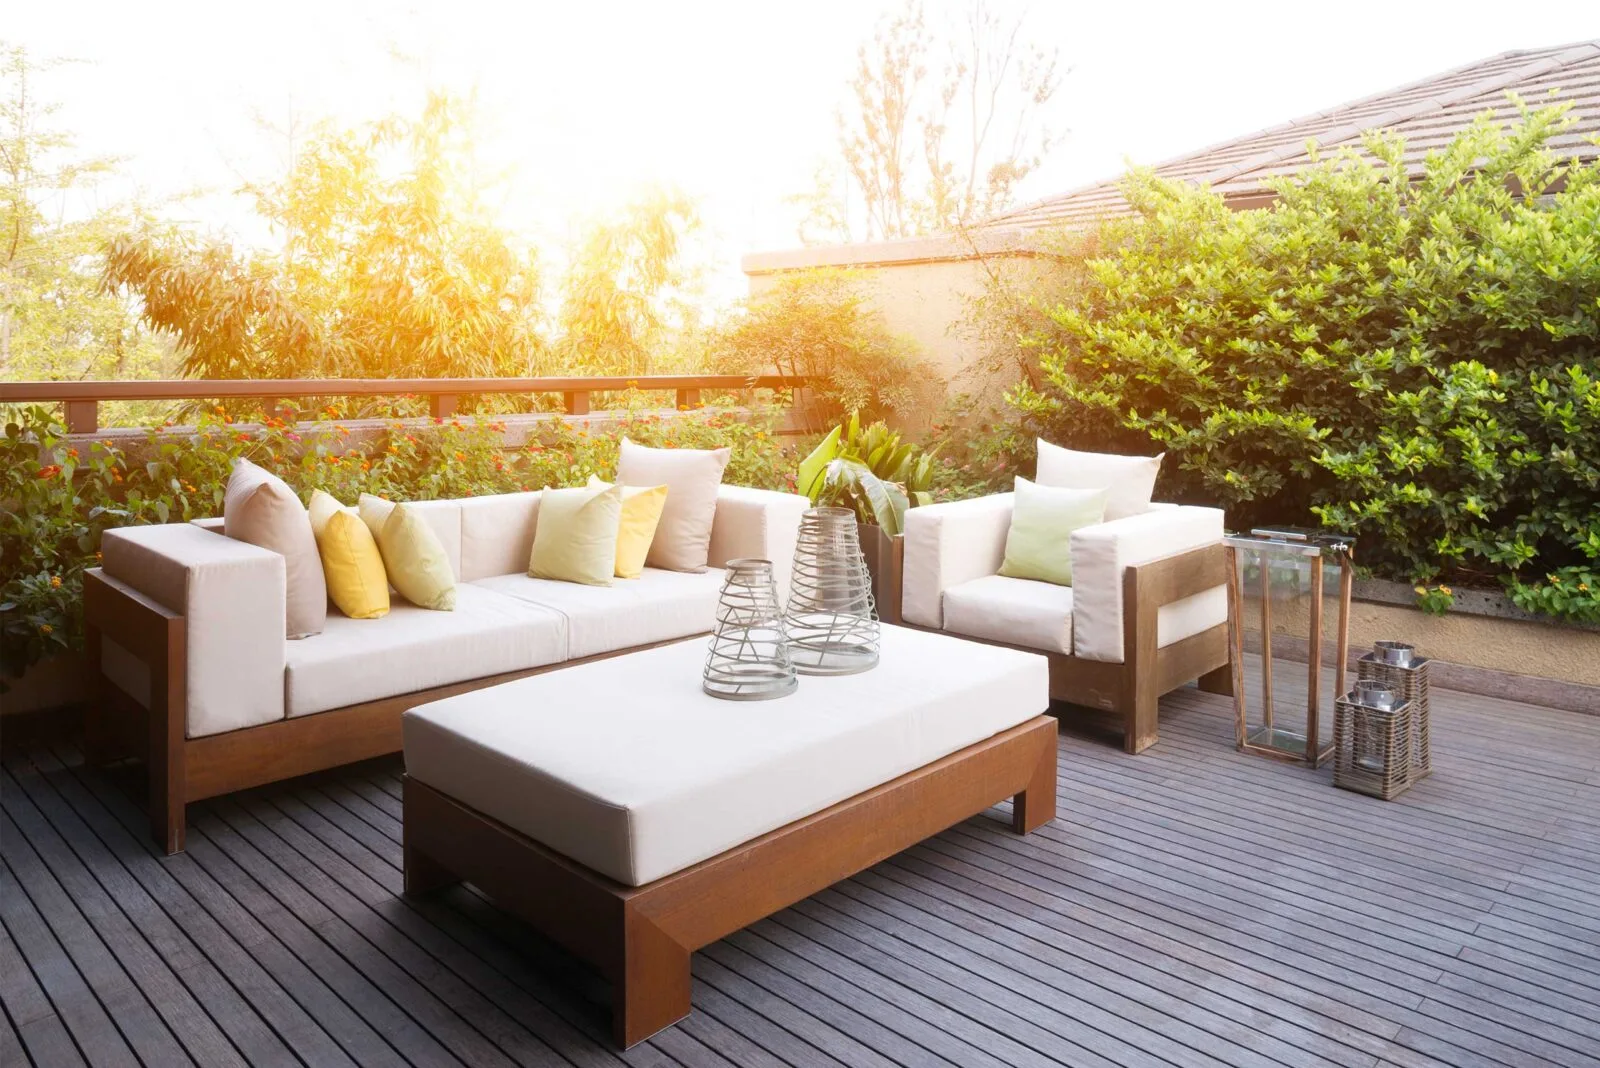 19 Best Outdoor Furniture Ideas for Your Backyard, Patio, and More